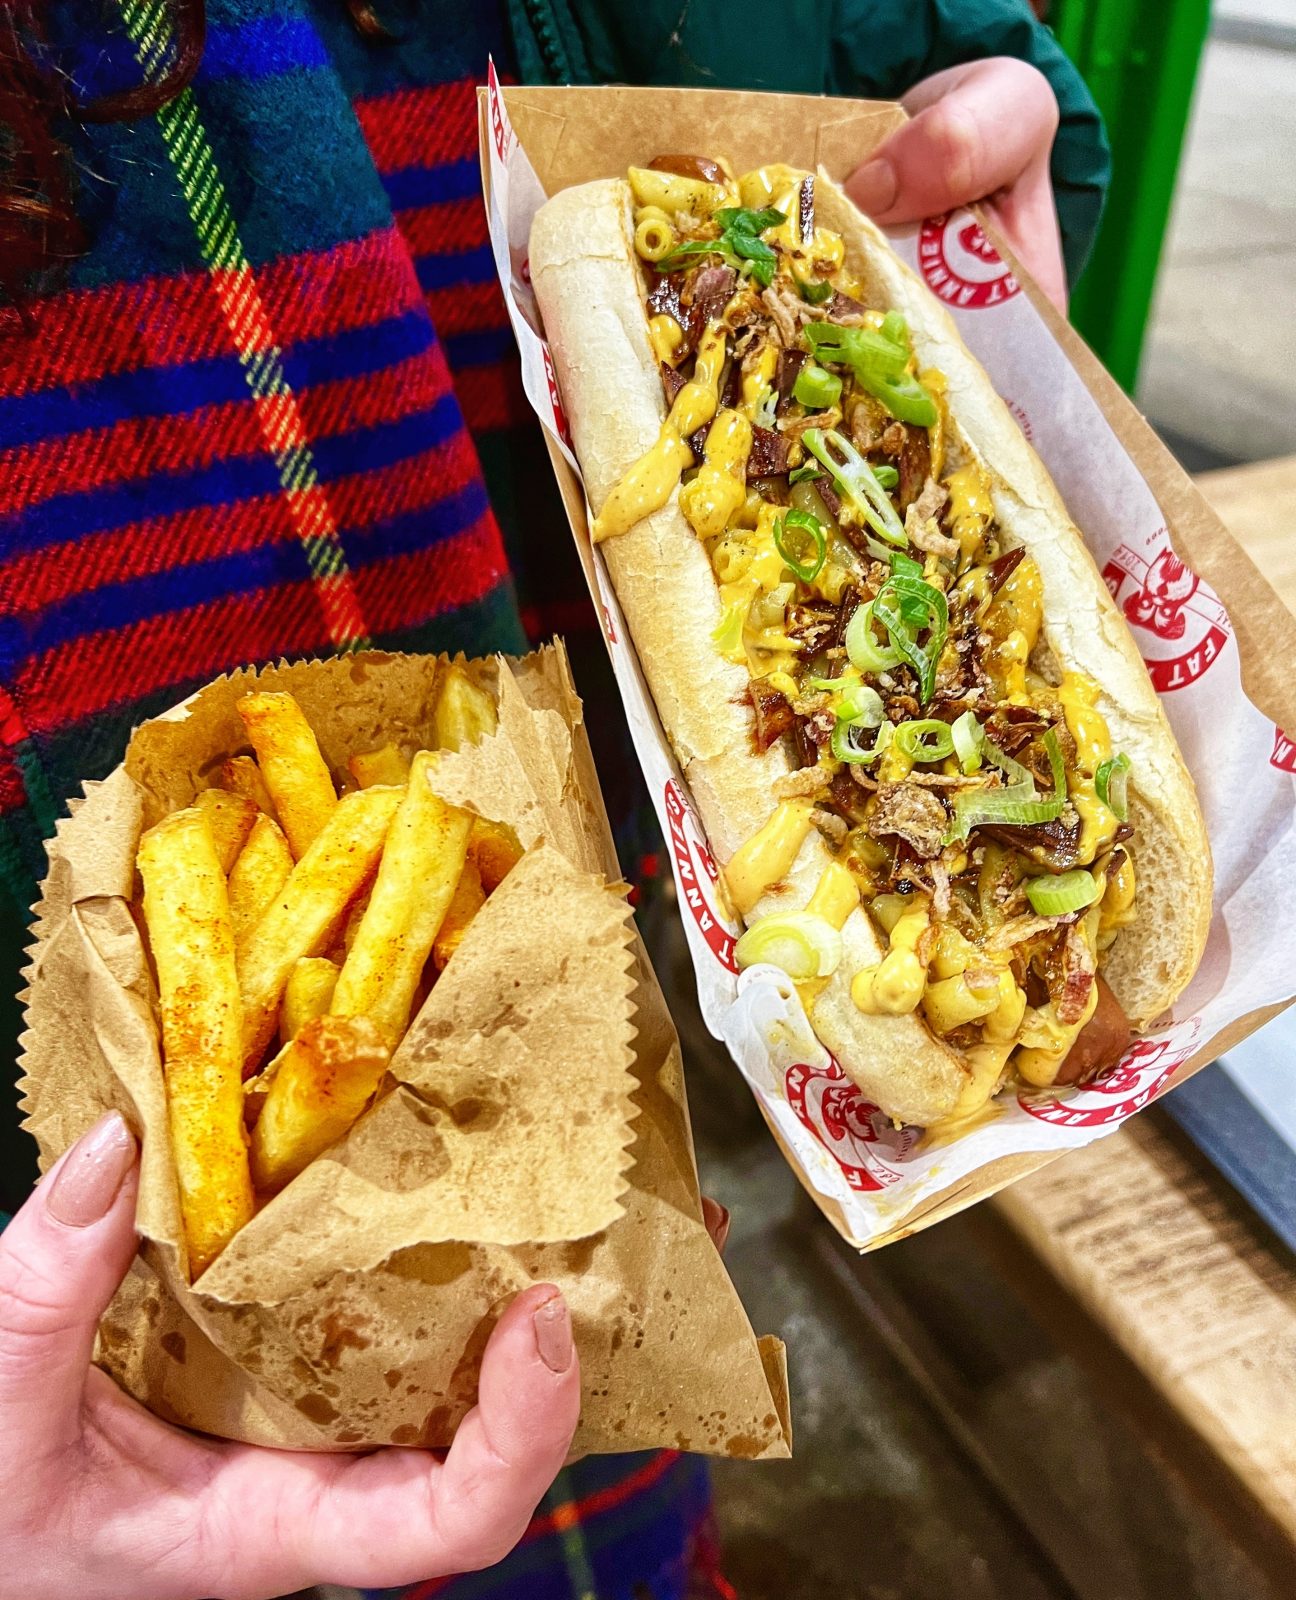 Hotdogs and chips at Fat Annie's in Leeds